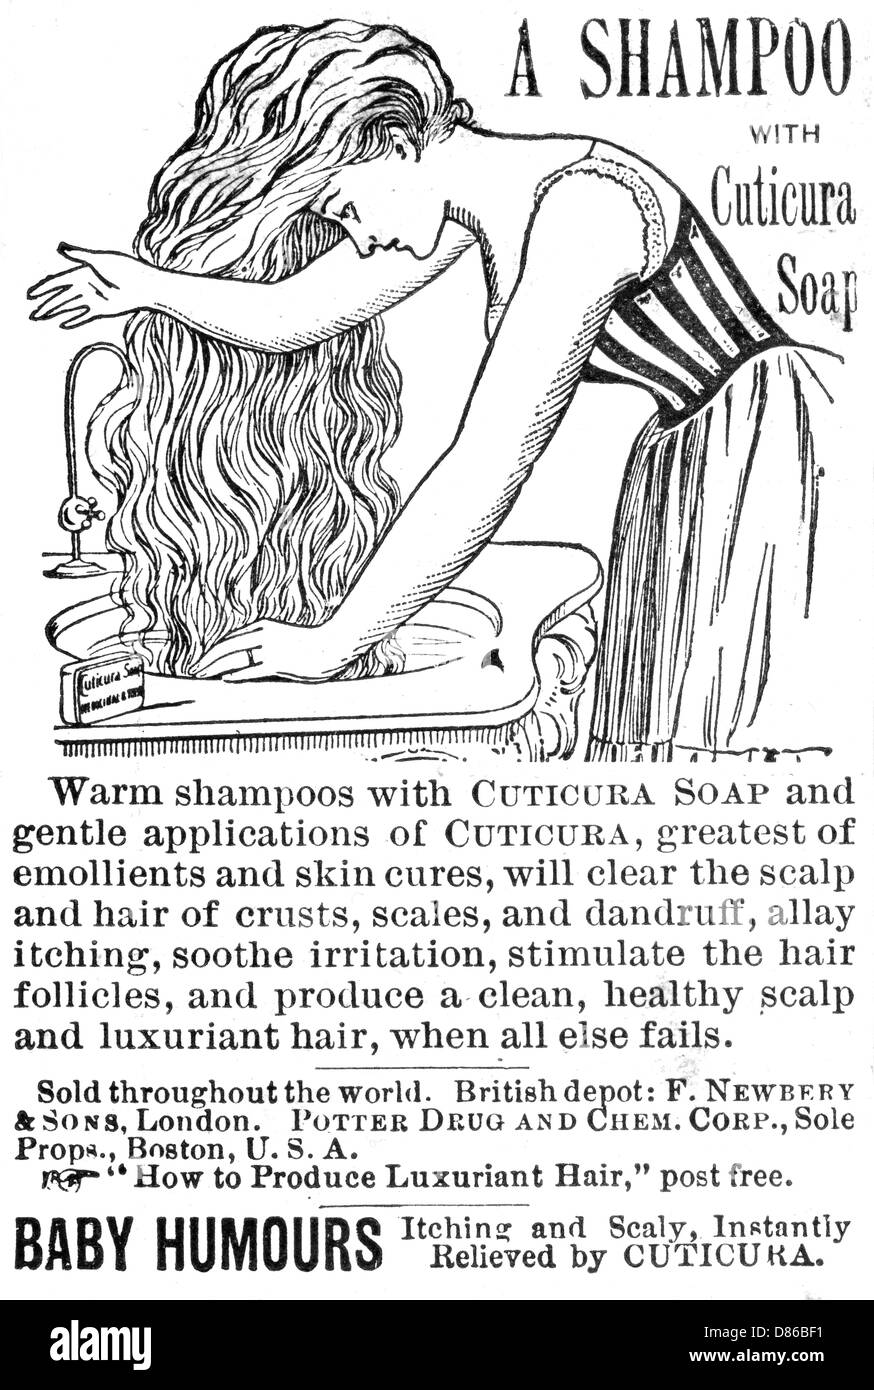 Hair washing with Cuticura soap, 1890s Stock Photo